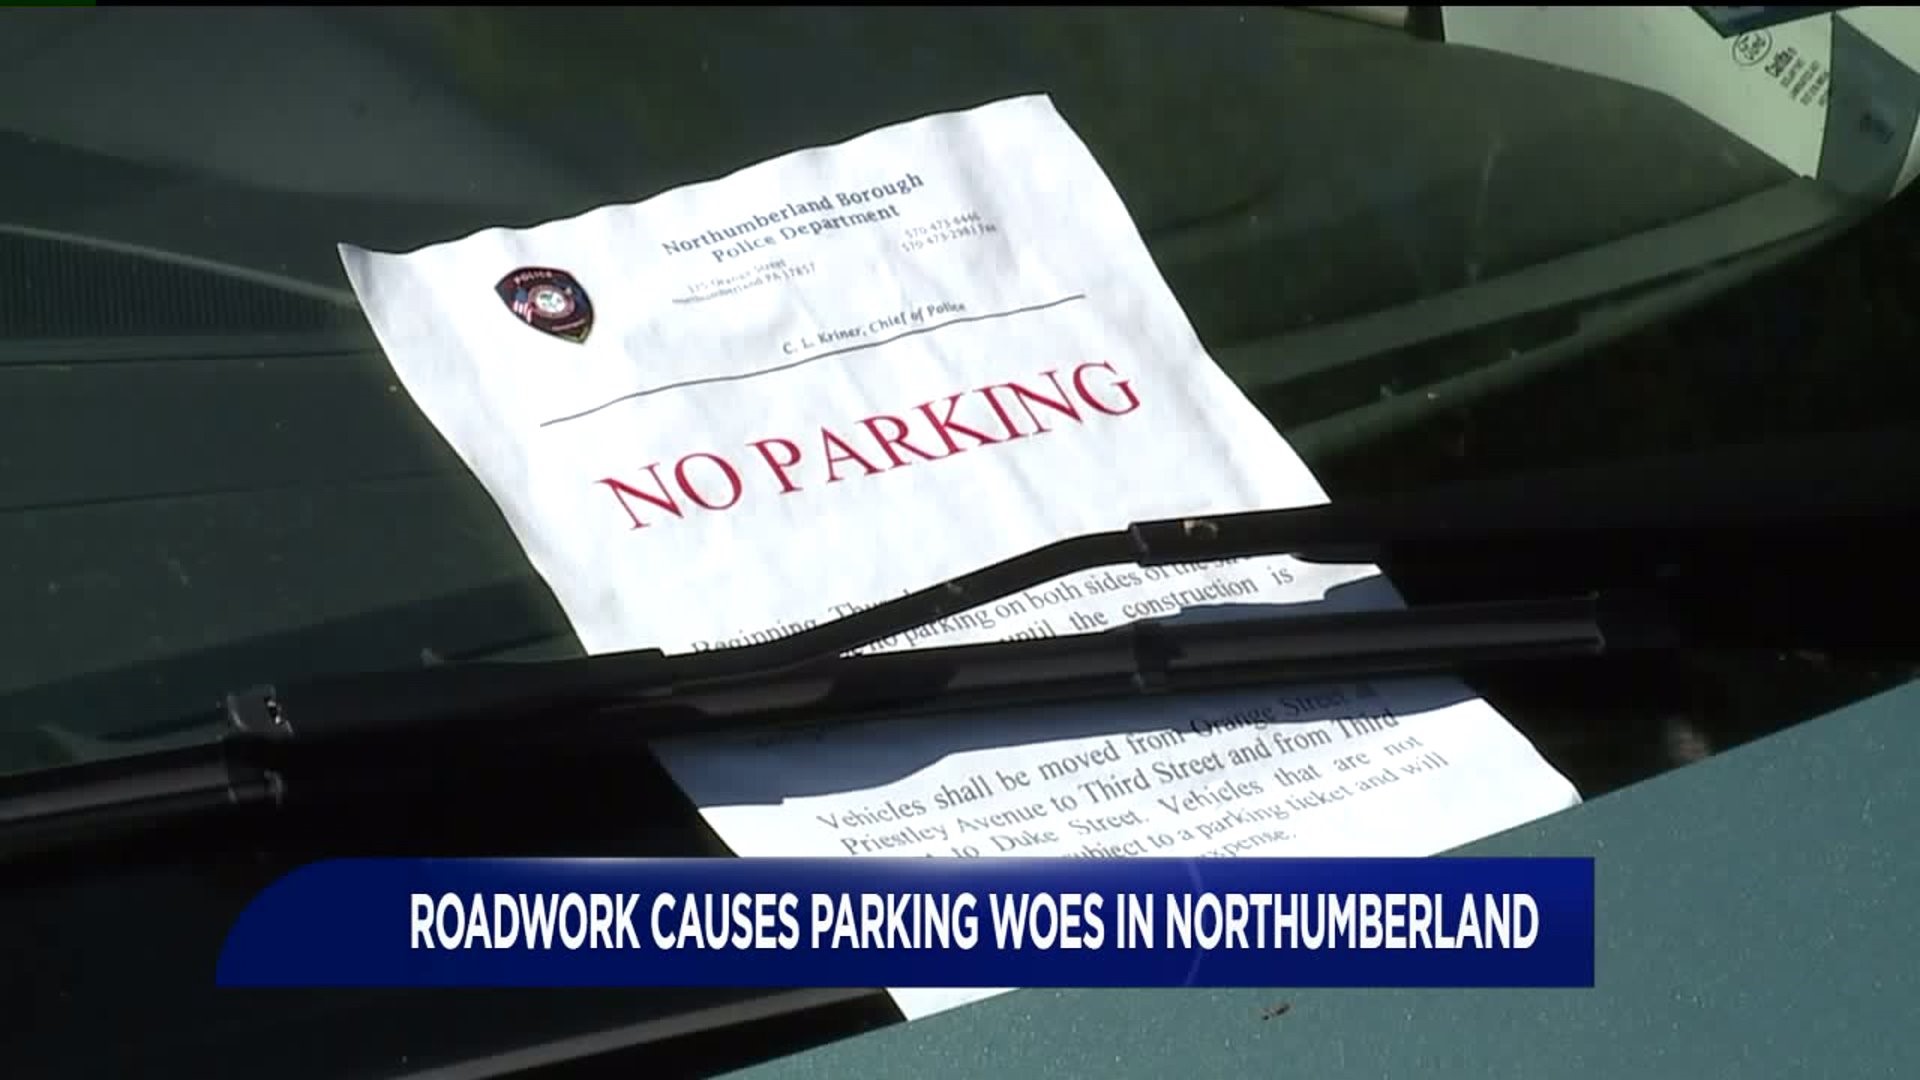 Roadwork Causes Parking Problems for Northumberland Residents